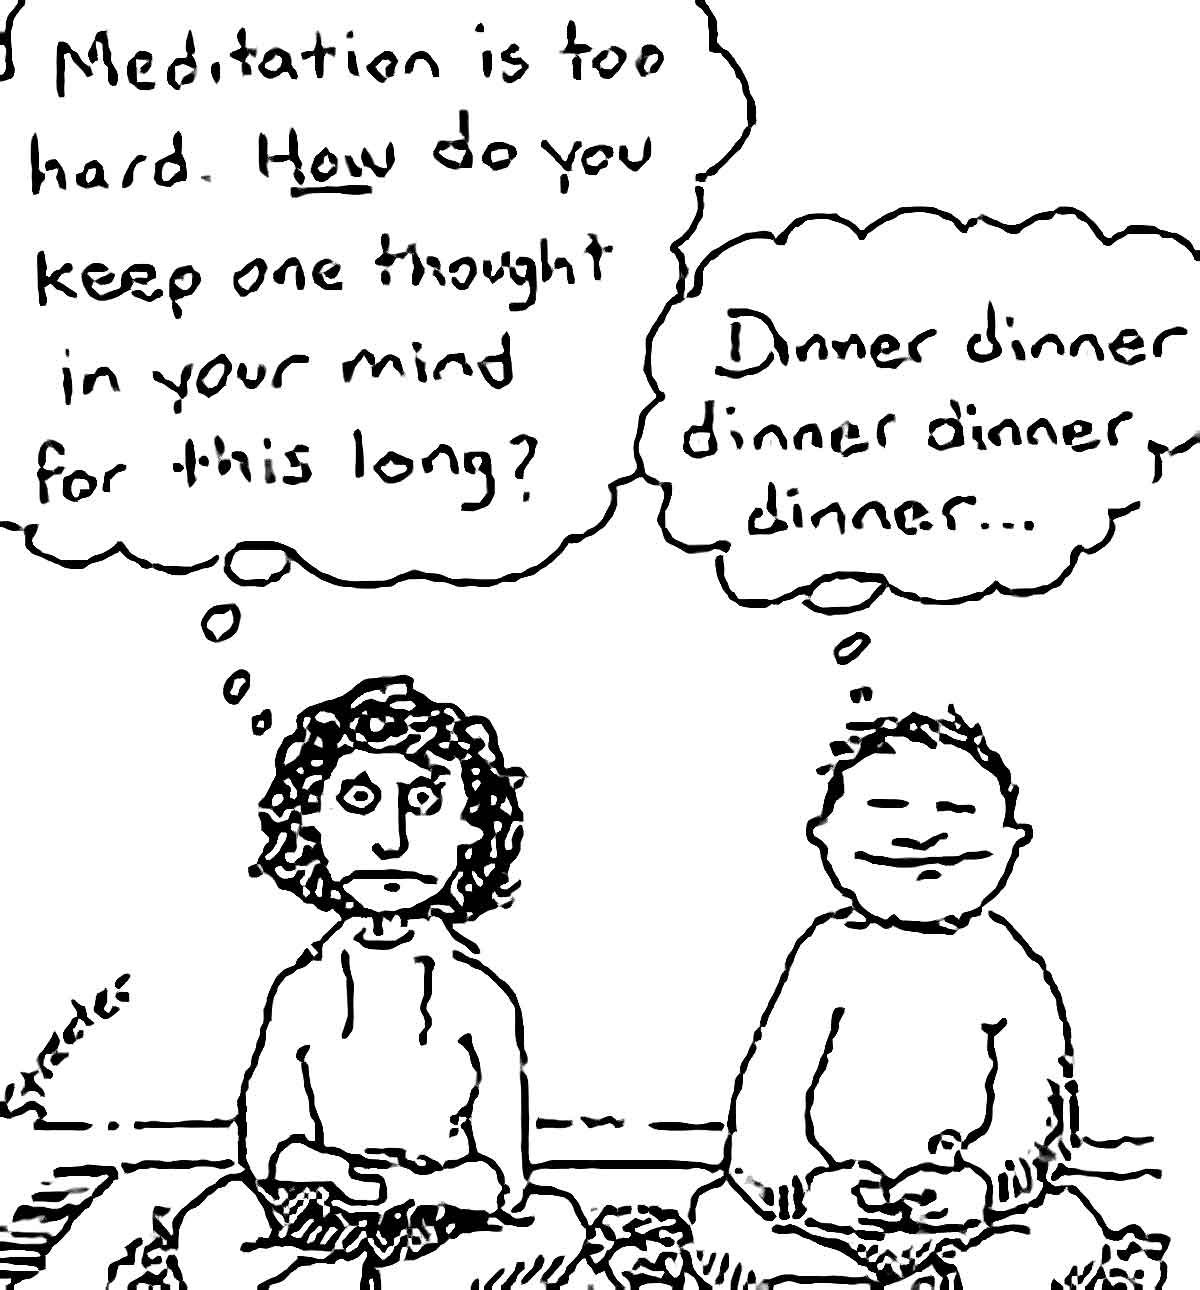 A cartoon on meditation for the Gary Taubes interview.